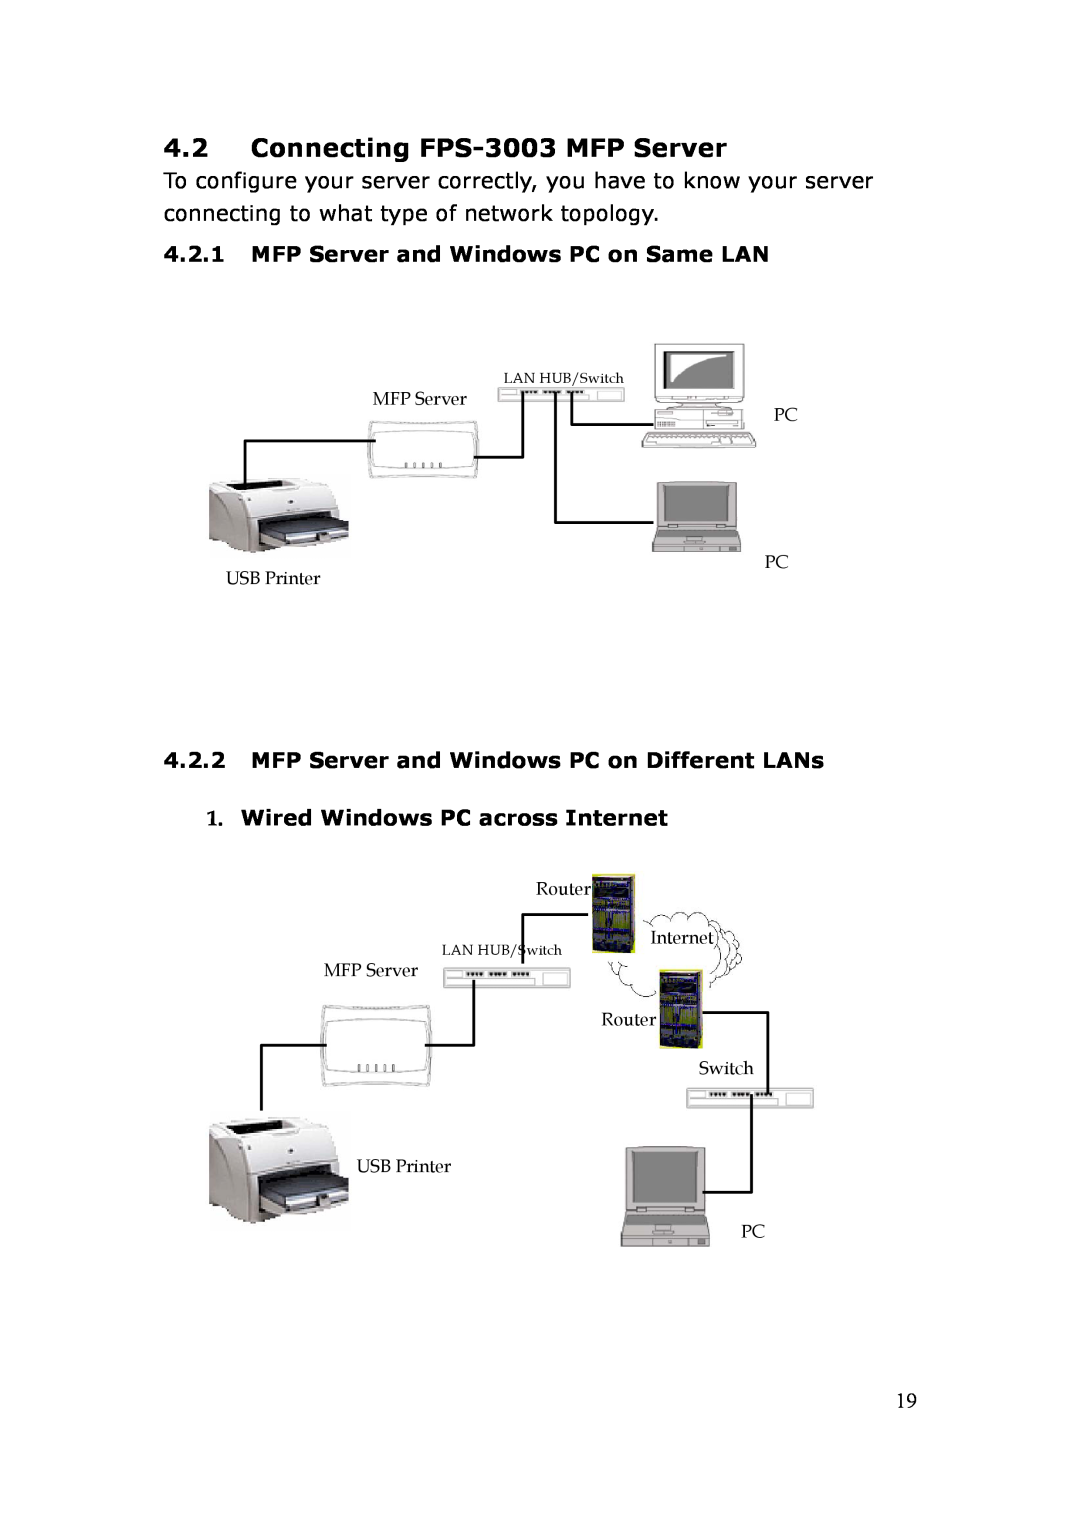 LevelOne Connecting FPS-3003 MFP Server, MFP Server and Windows PC on Same LAN, Wired Windows PC across Internet 